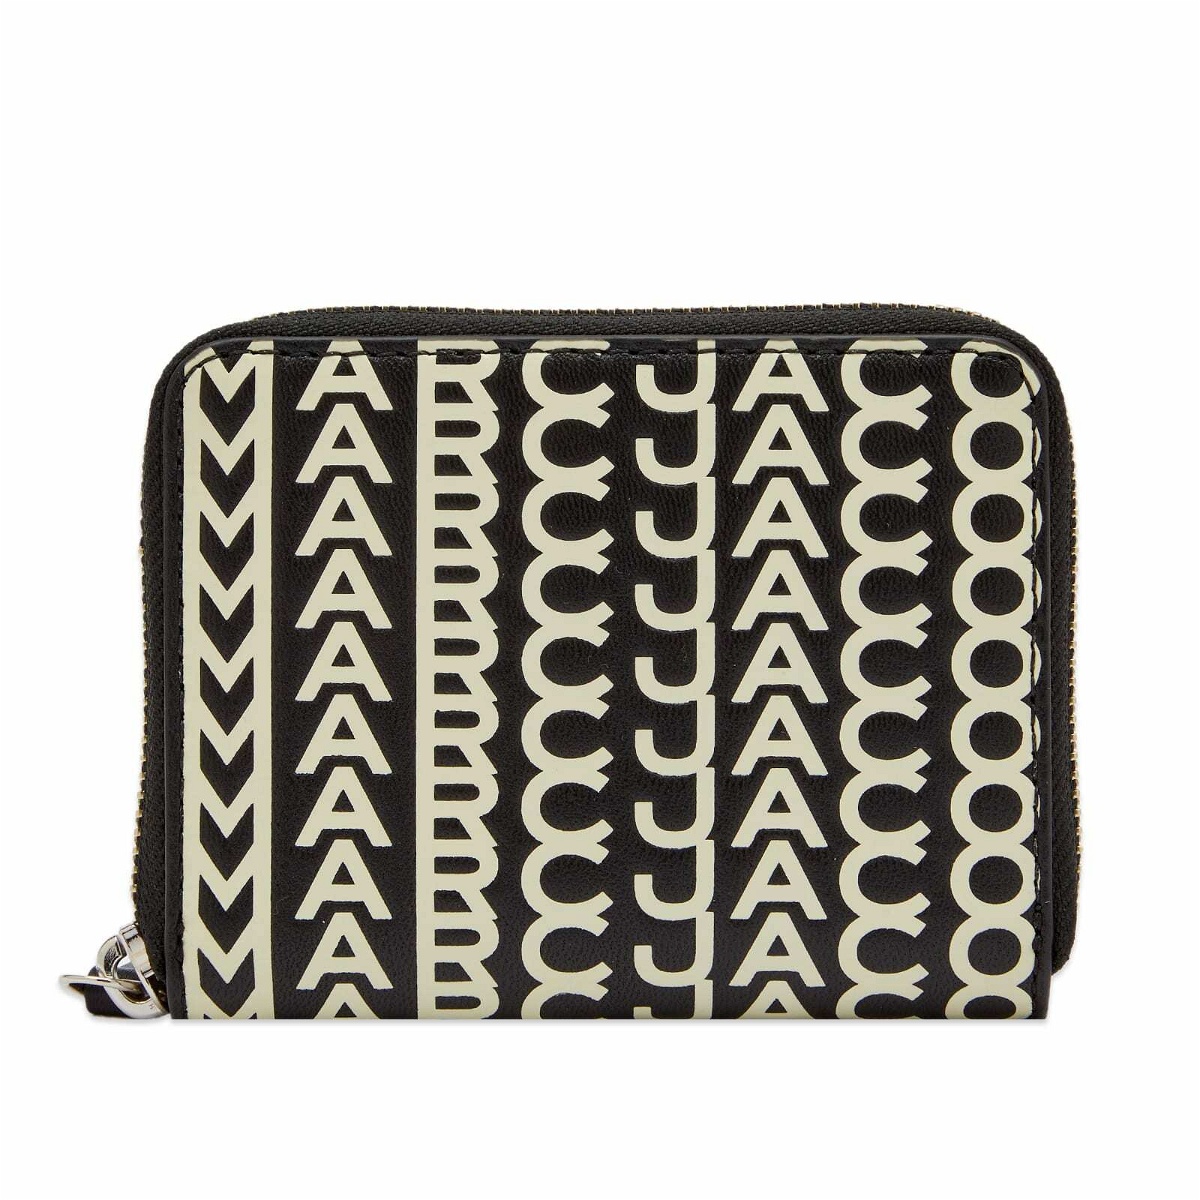 Marc Jacobs Women's The Zip Around Wallet in Black/White Marc Jacobs